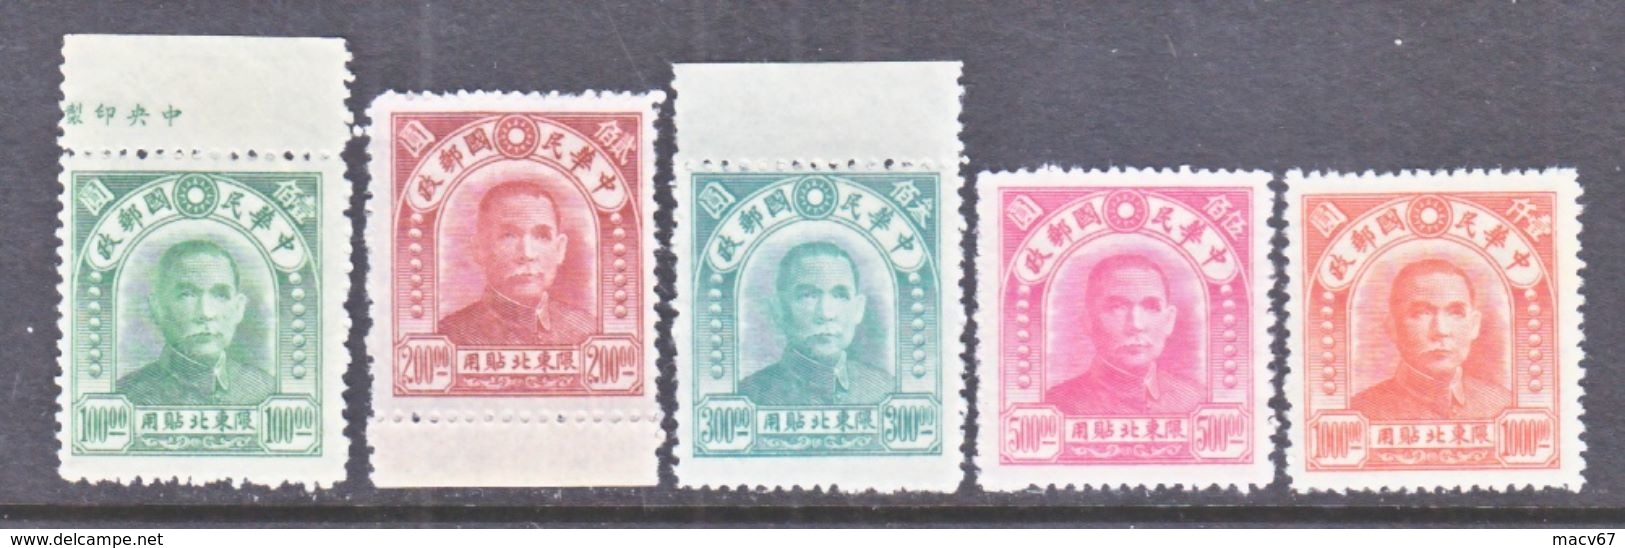 CHINA  NORTH-EAST  48-52    * - Chine Du Nord-Est 1946-48